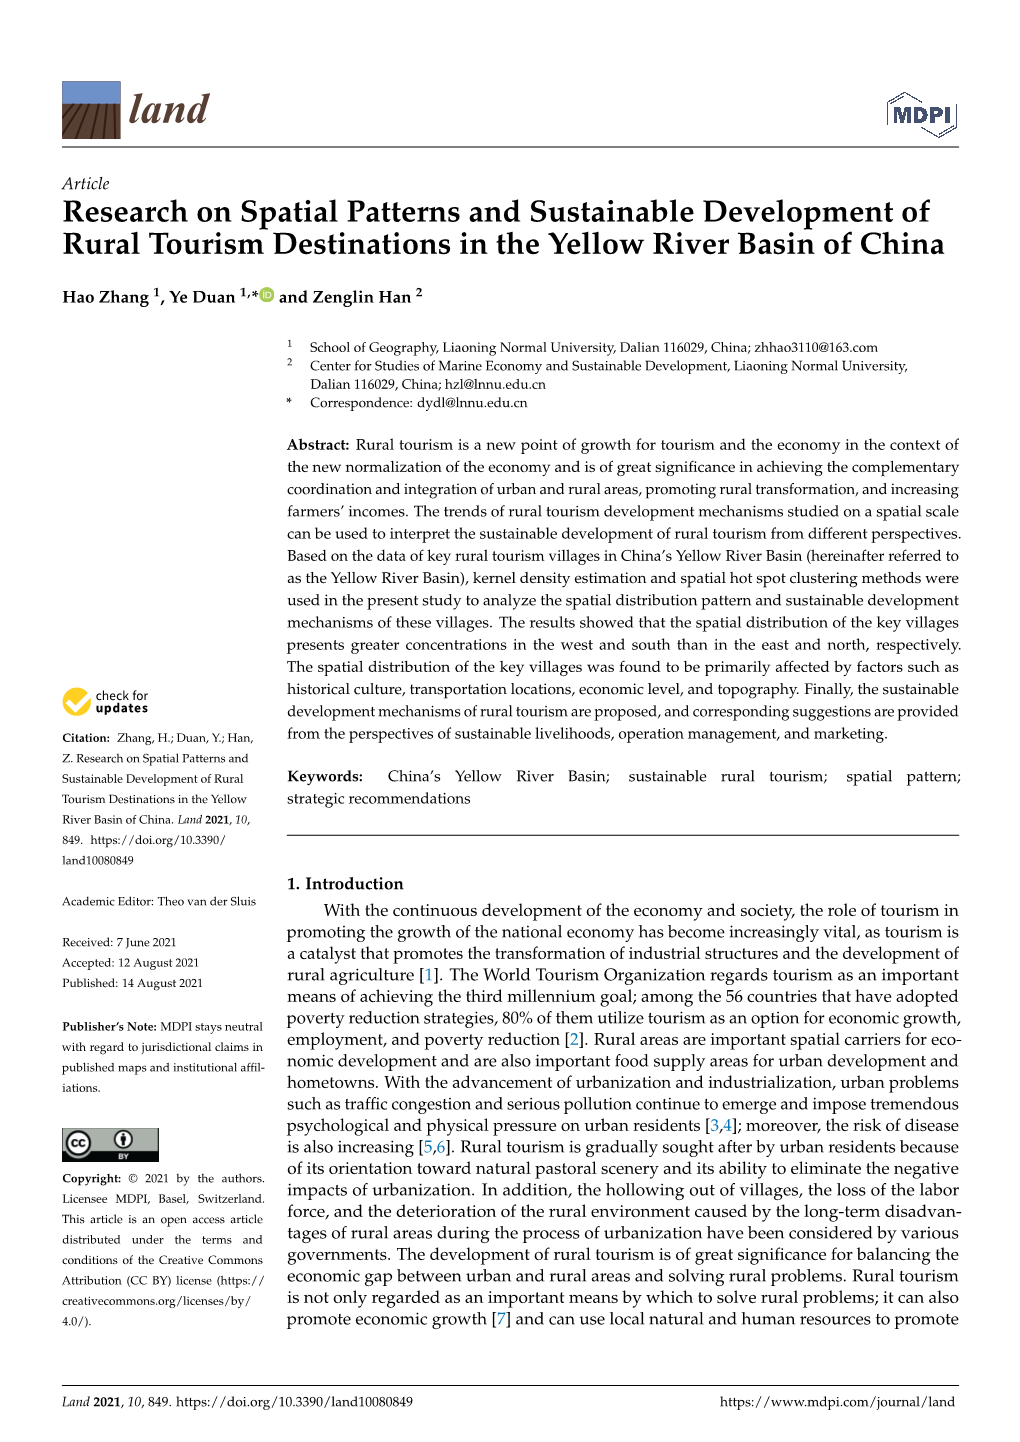 Research on Spatial Patterns and Sustainable Development of Rural Tourism Destinations in the Yellow River Basin of China